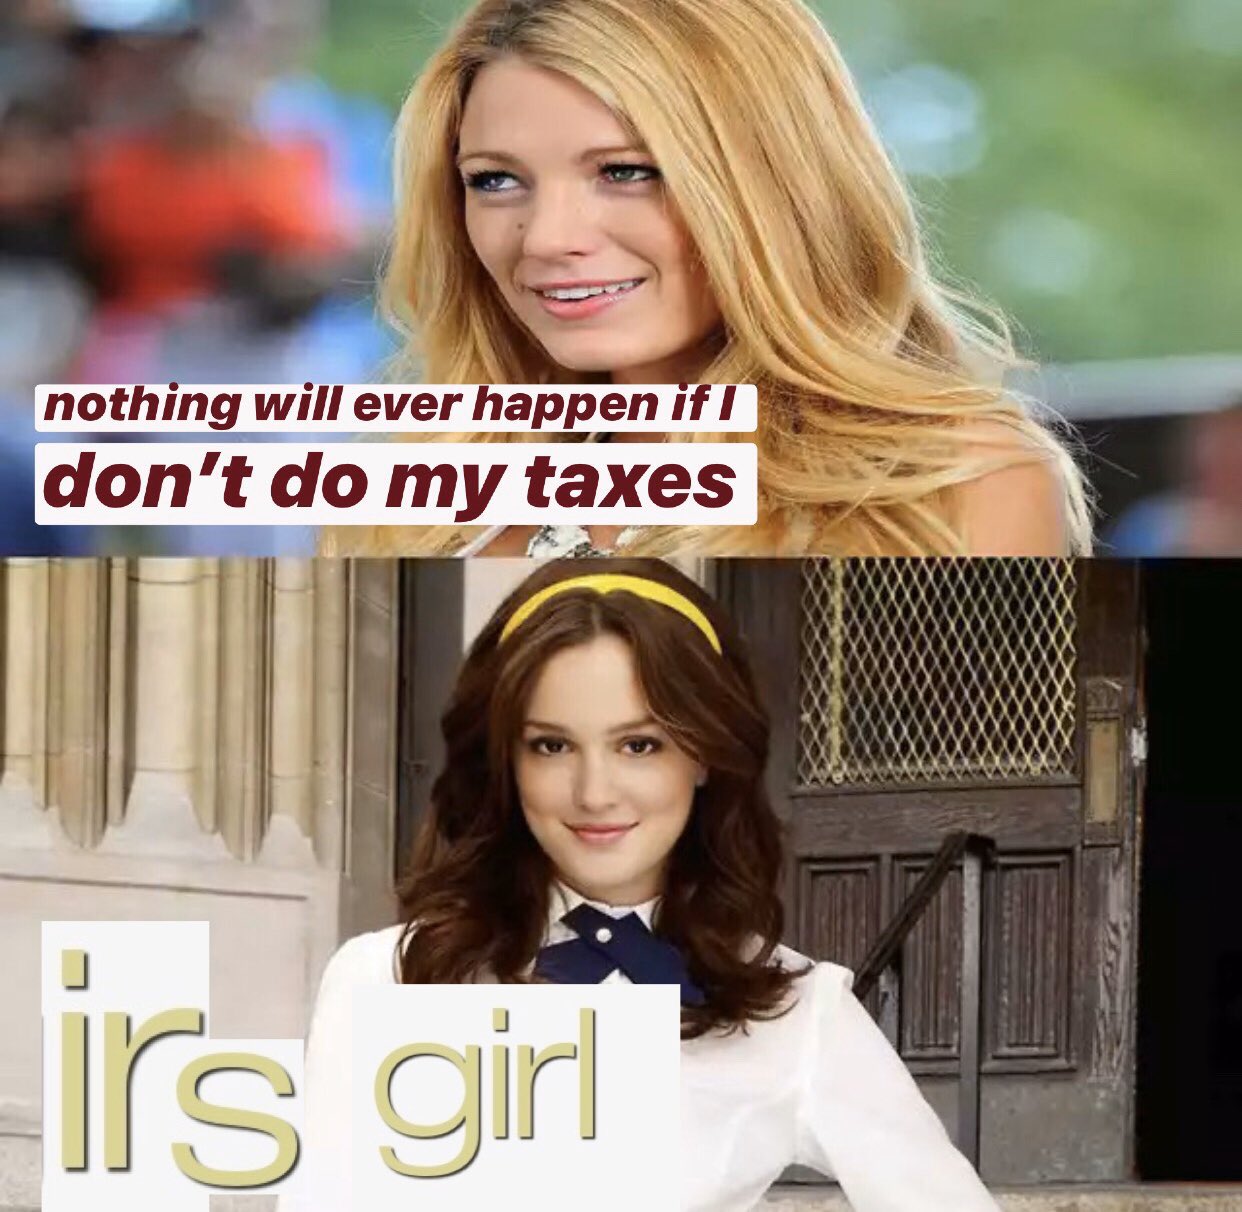 meme - blond - nothing will ever happen if I don't do my taxes Anaan Www Aaaaa Www An Wa Va irs girl